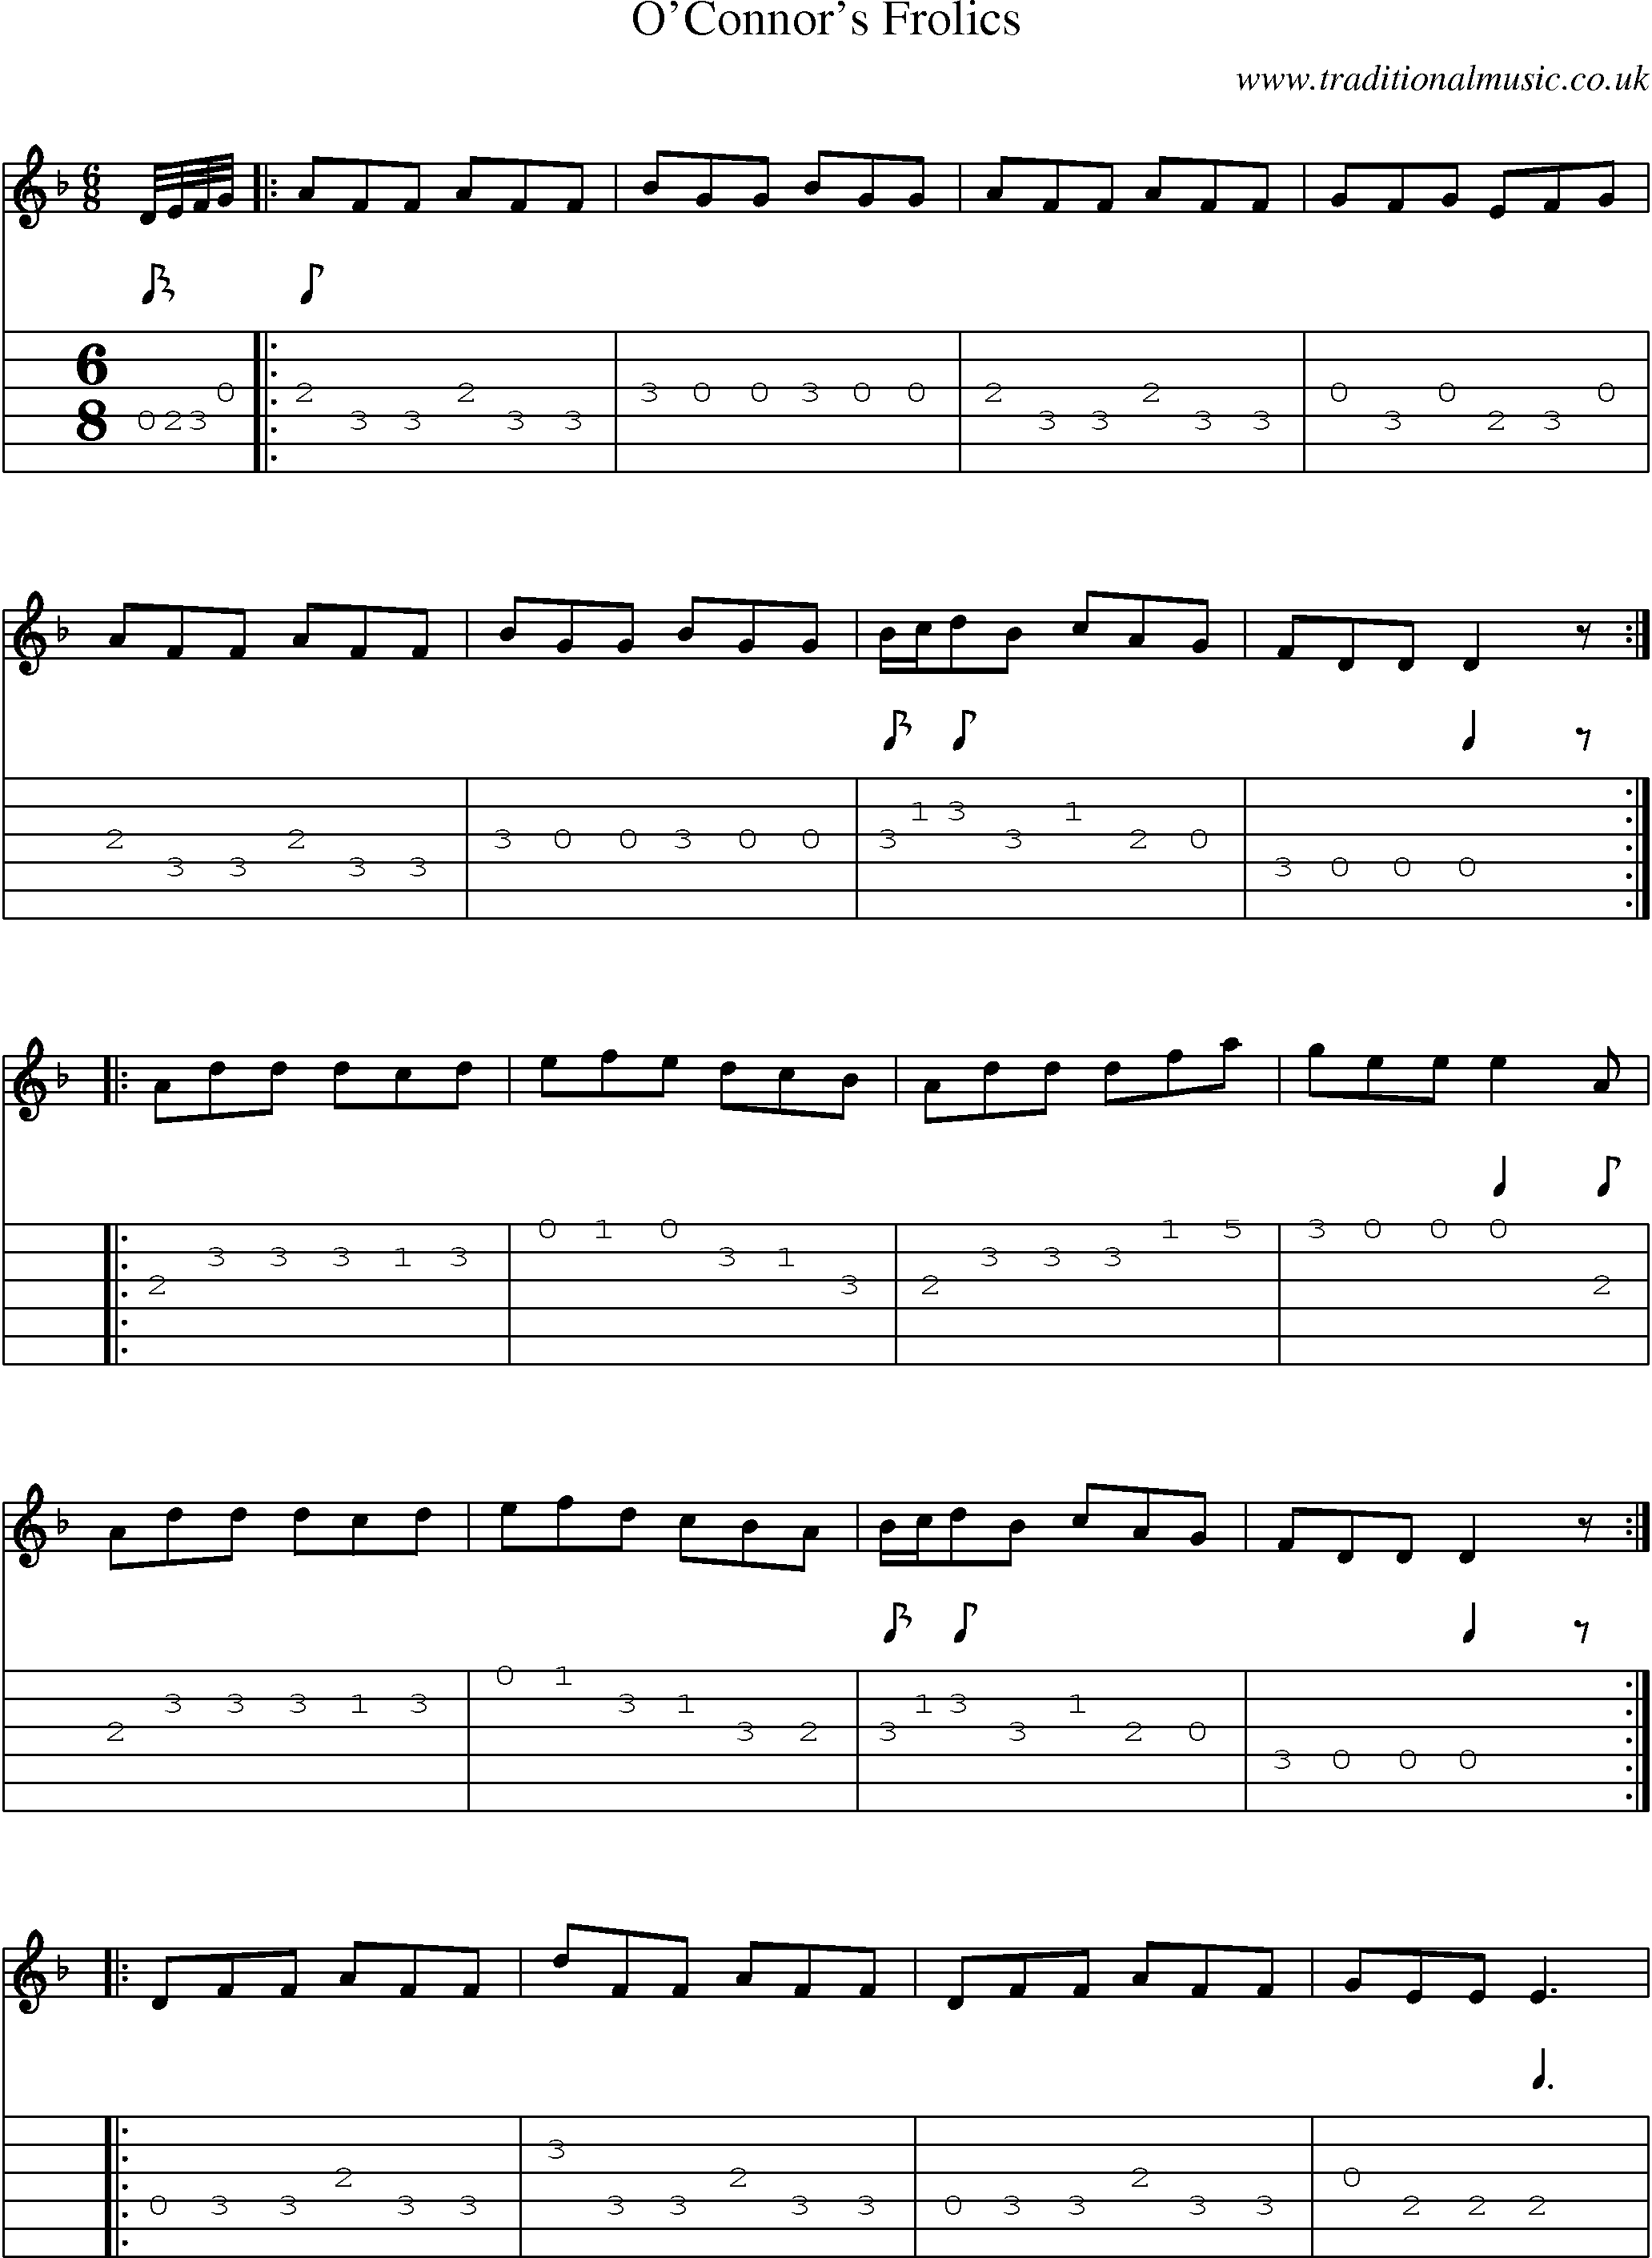 Music Score and Guitar Tabs for Oconnors Frolics